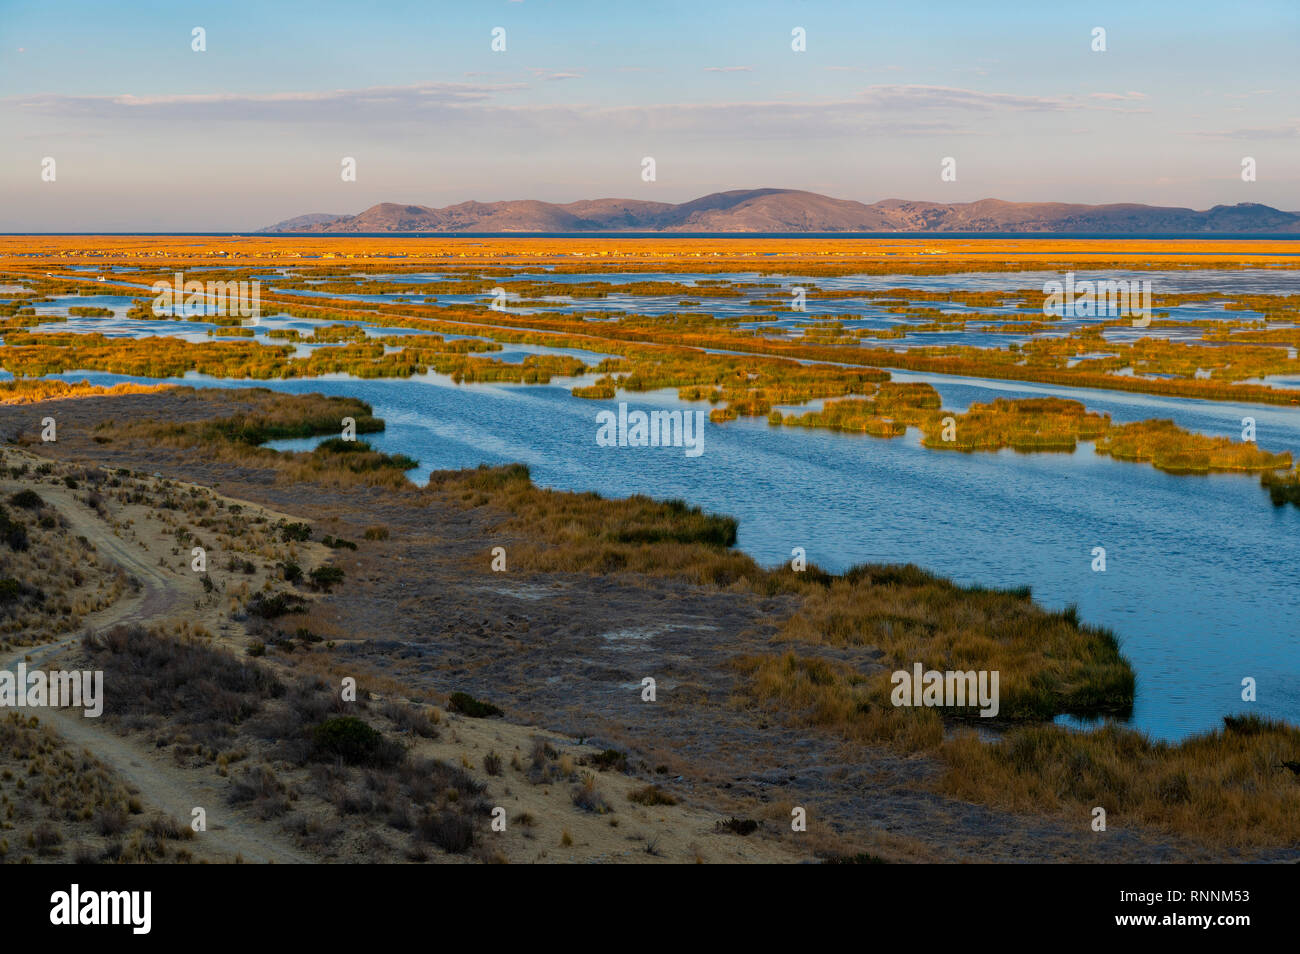 Sunrise on the Titicaca Lake near the city of Puno with a view over the totora reed floating islands of the Uros indigenous group, Peru. Stock Photo